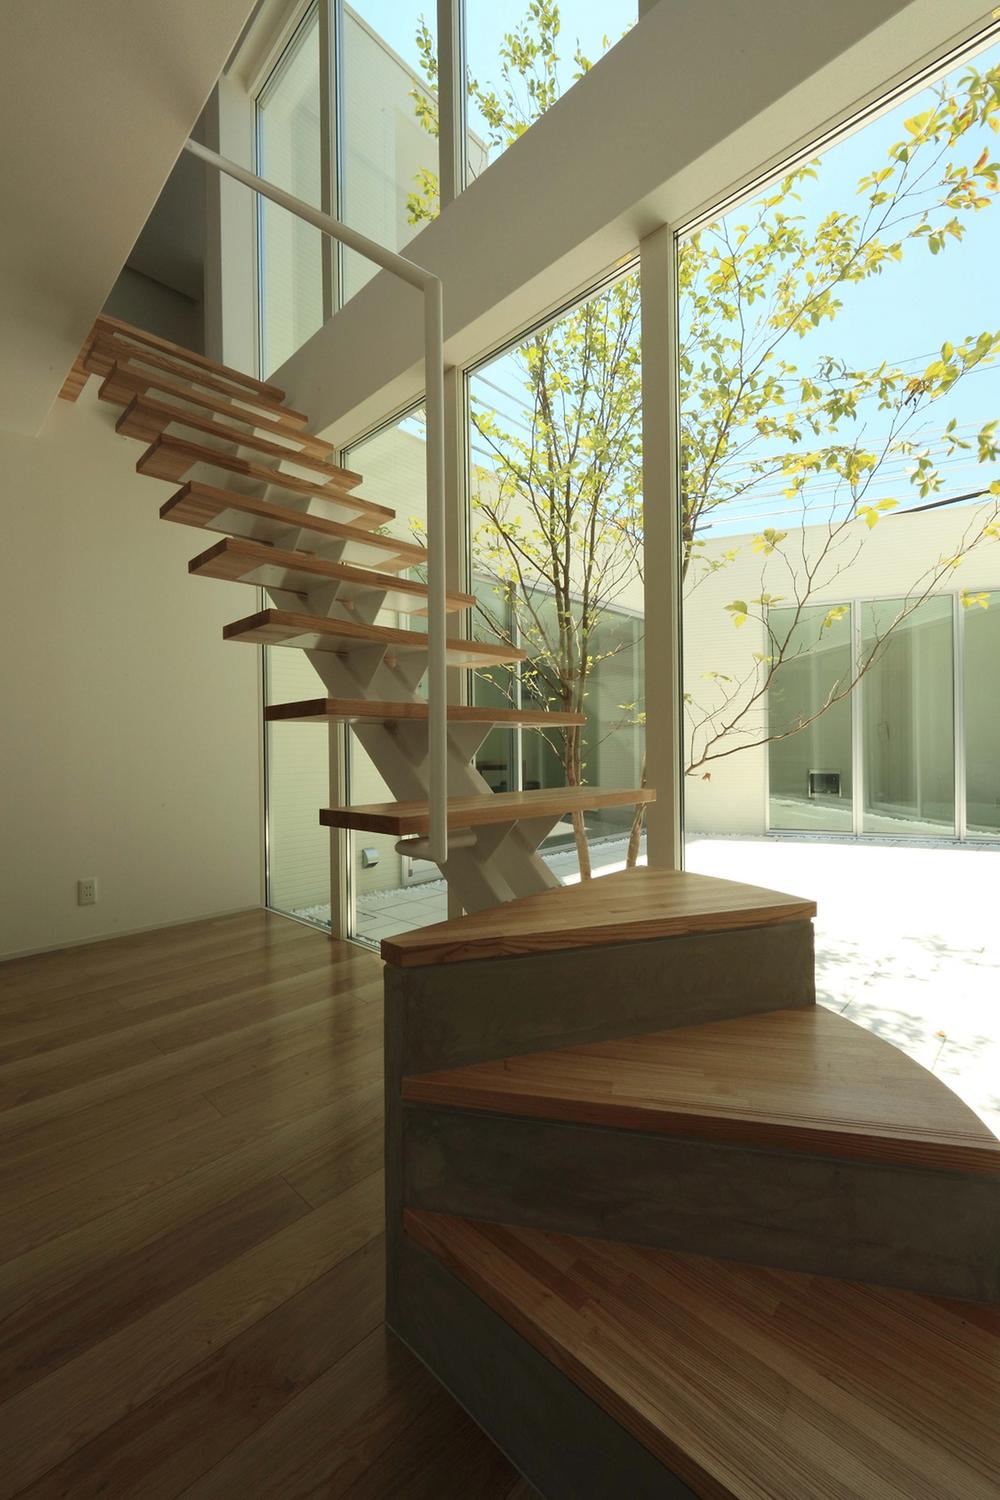 Building plan example (introspection photo). Living-in stairs is a design in which the face of the family look